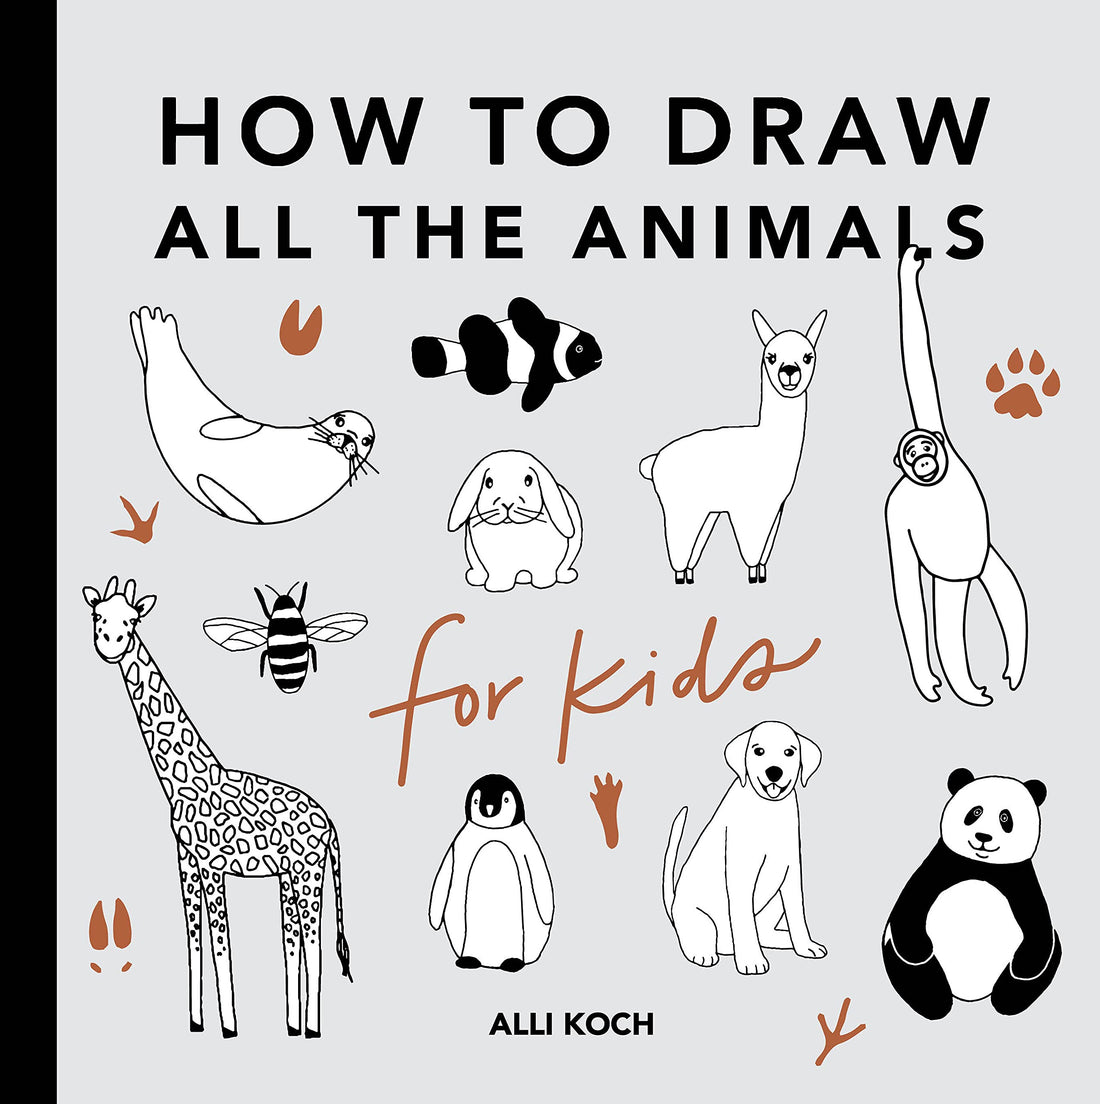 How To Draw All The Animals - Parkette.